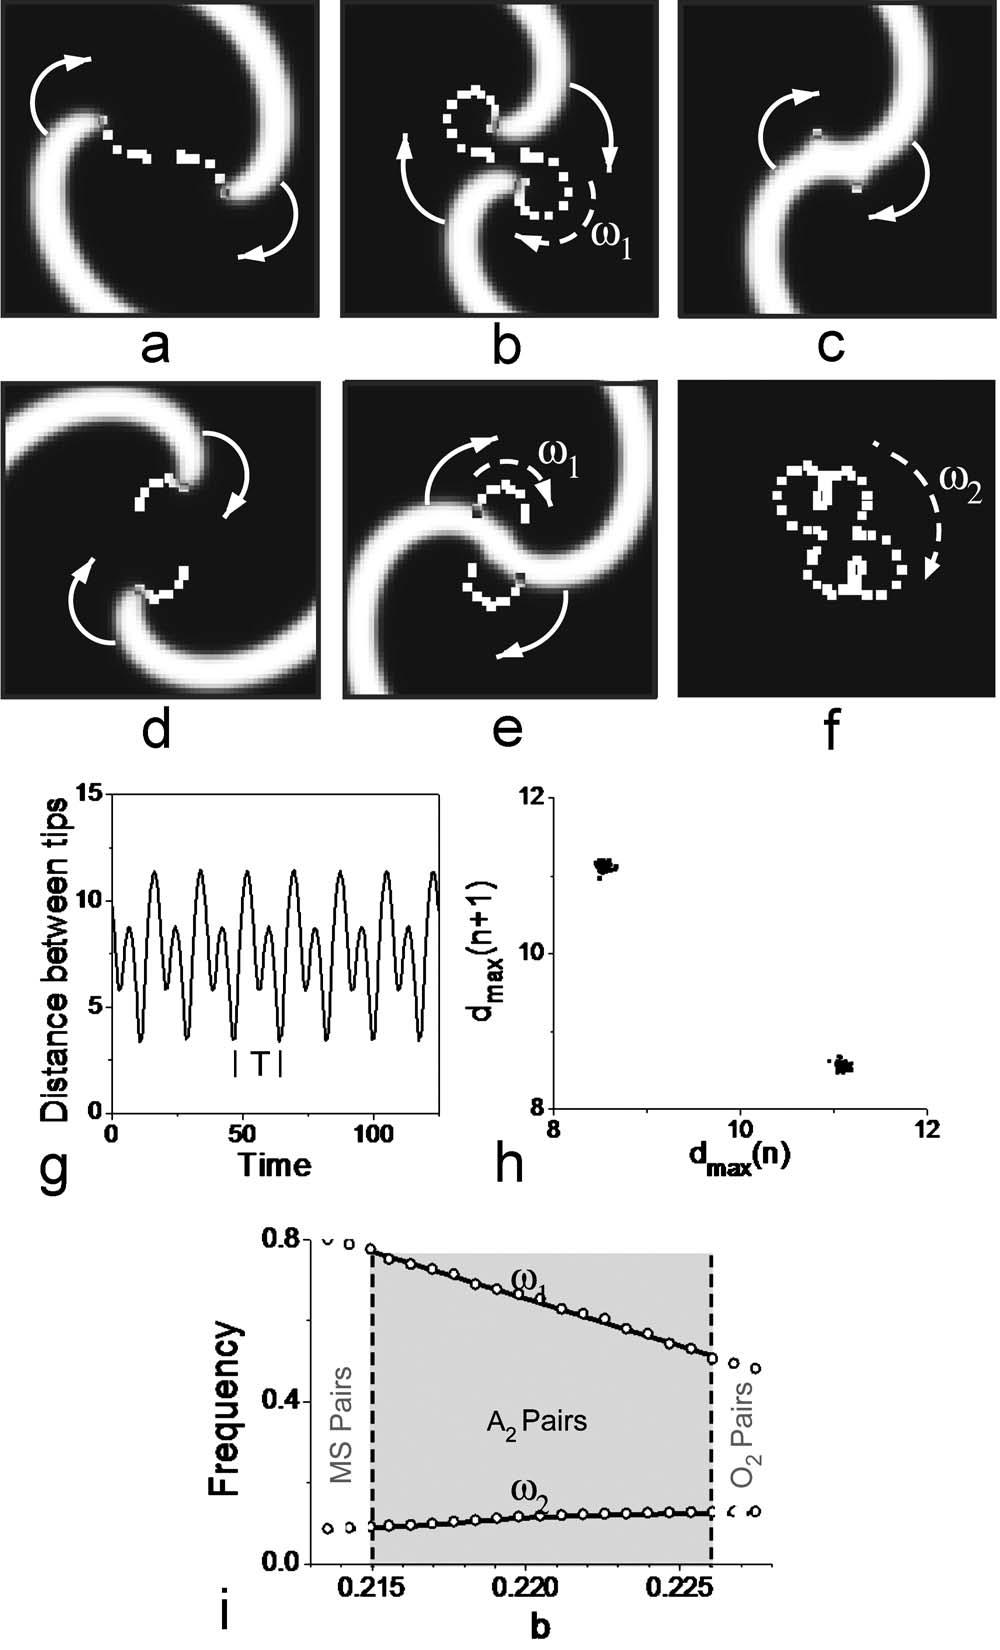 ZEMLIN et al. a petal pattern that contains two different petal sizes. Figure 2 g shows the distance between the tips as a function of time, where alternans can also clearly be seen.